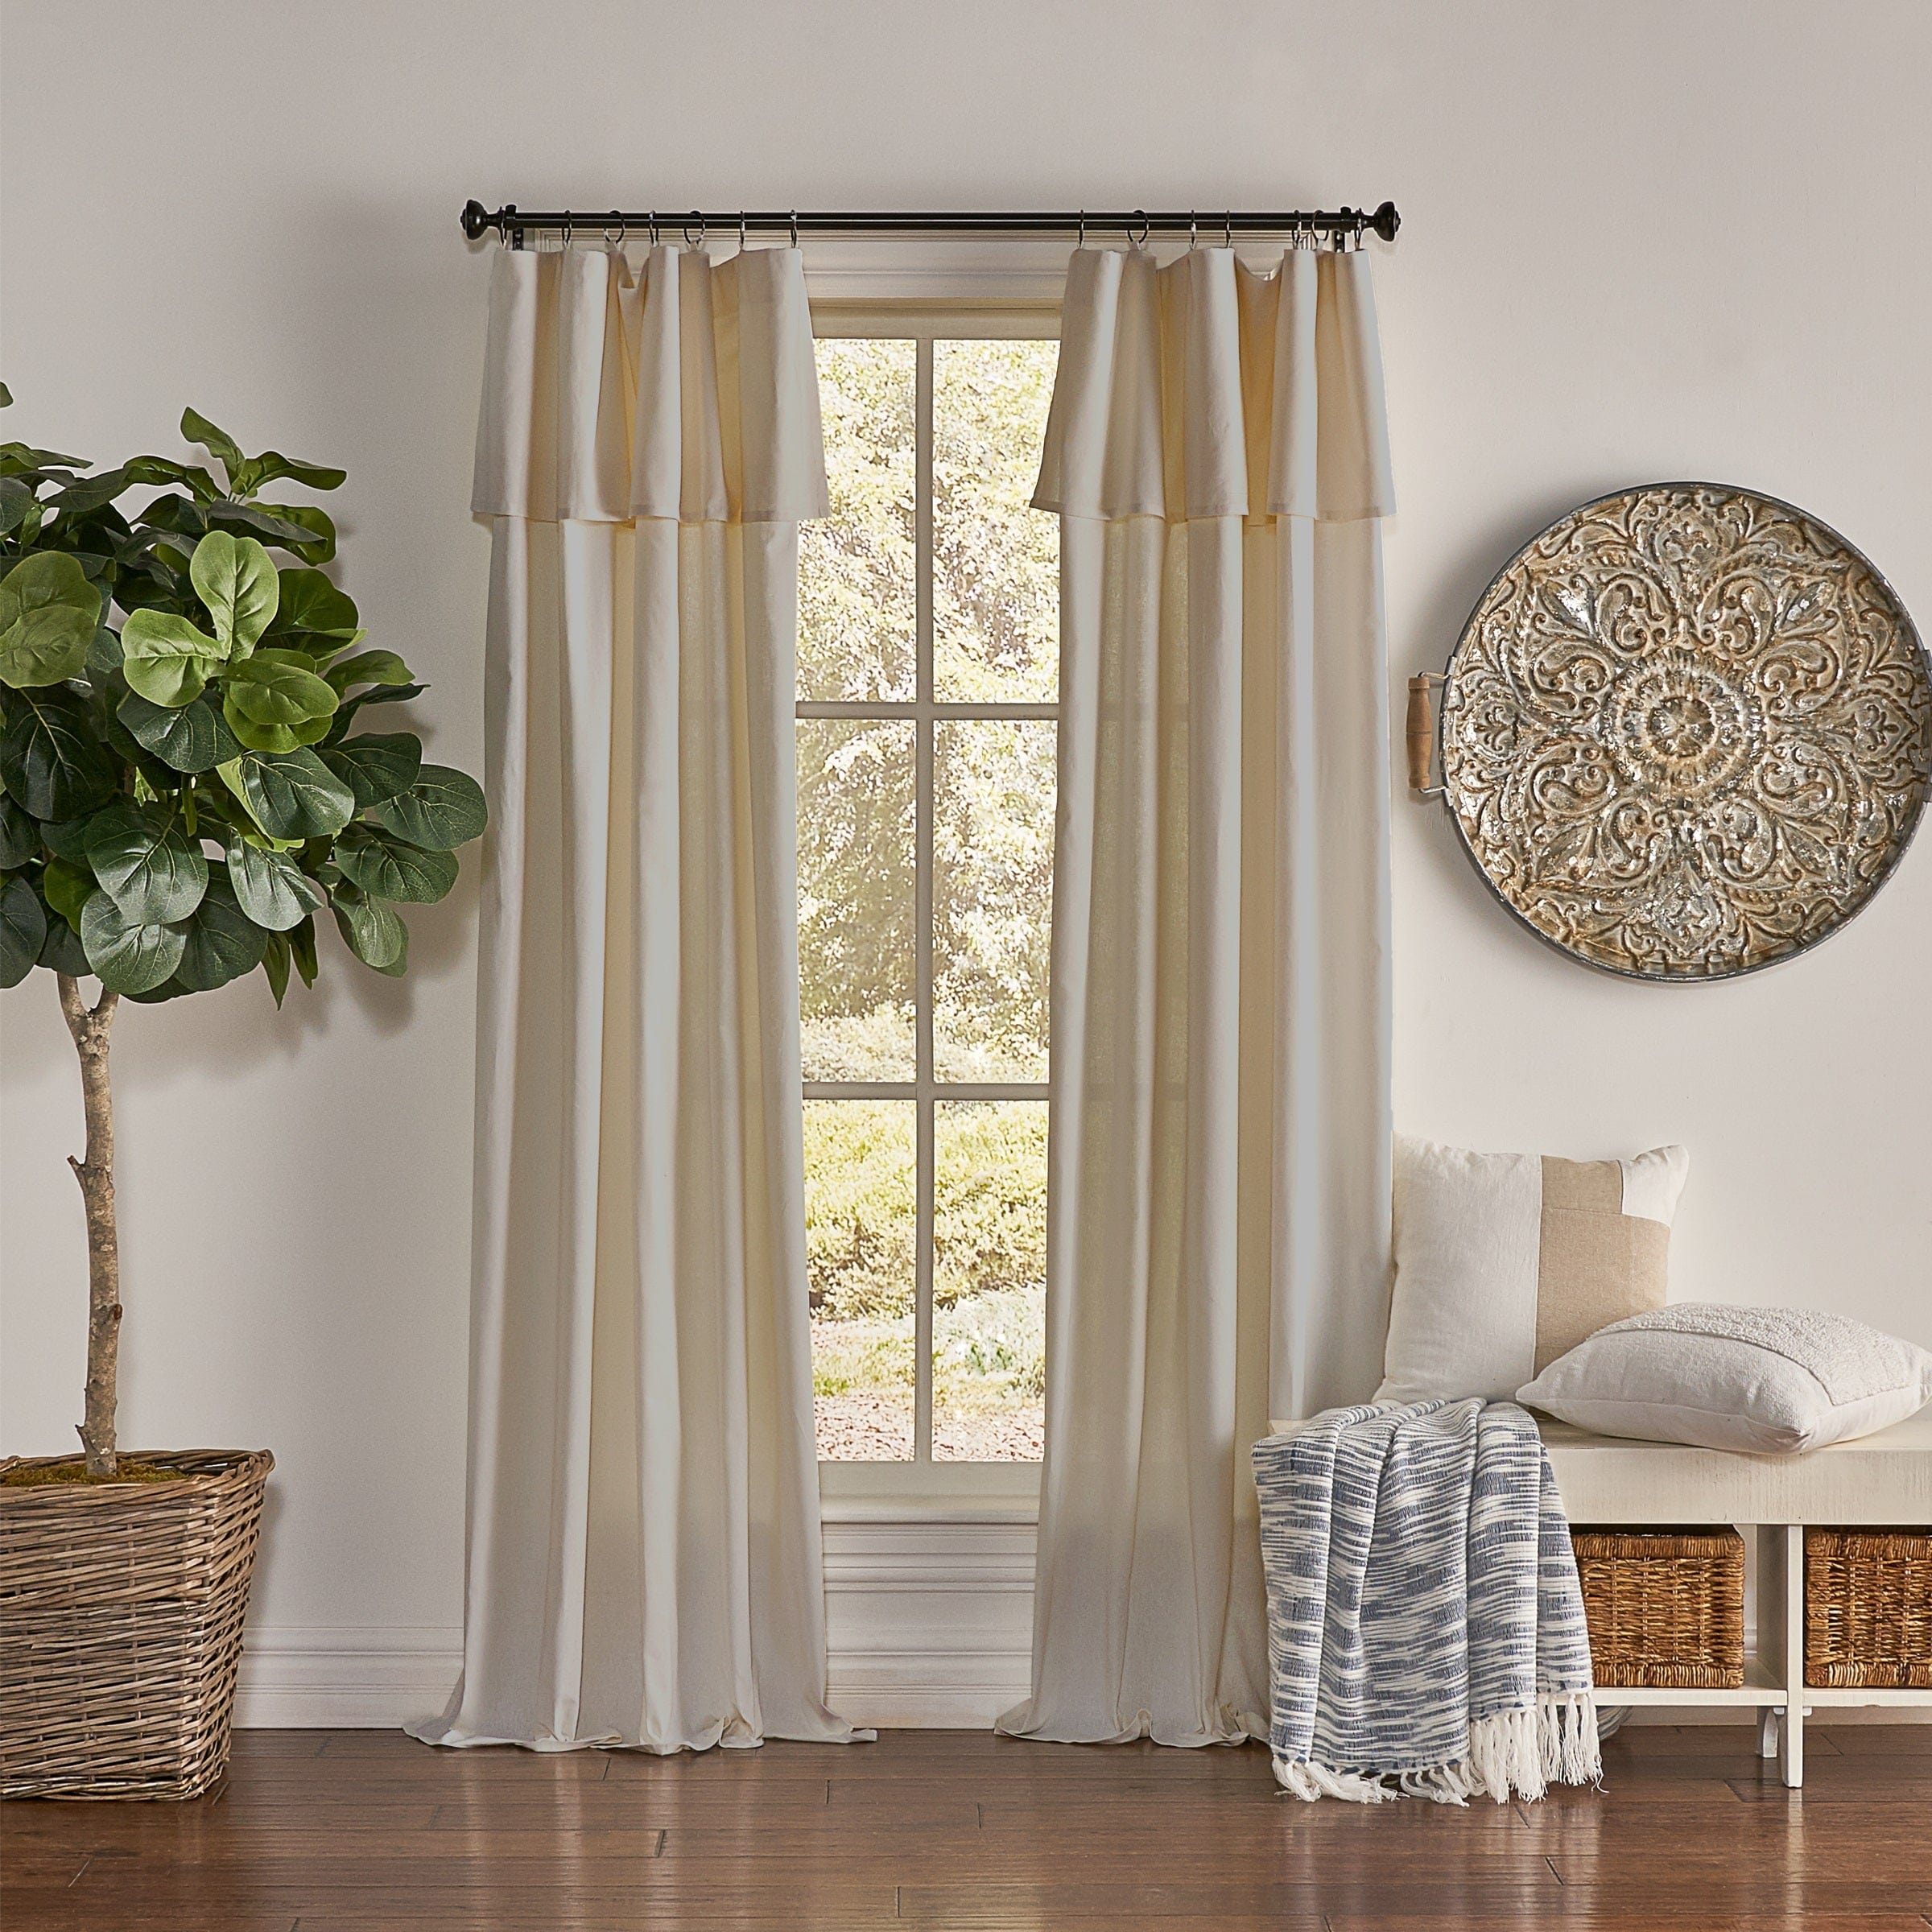 SureFit Mercantile Drop Cloth Solid Curtain Panel with Valance in Linen 50 x 95